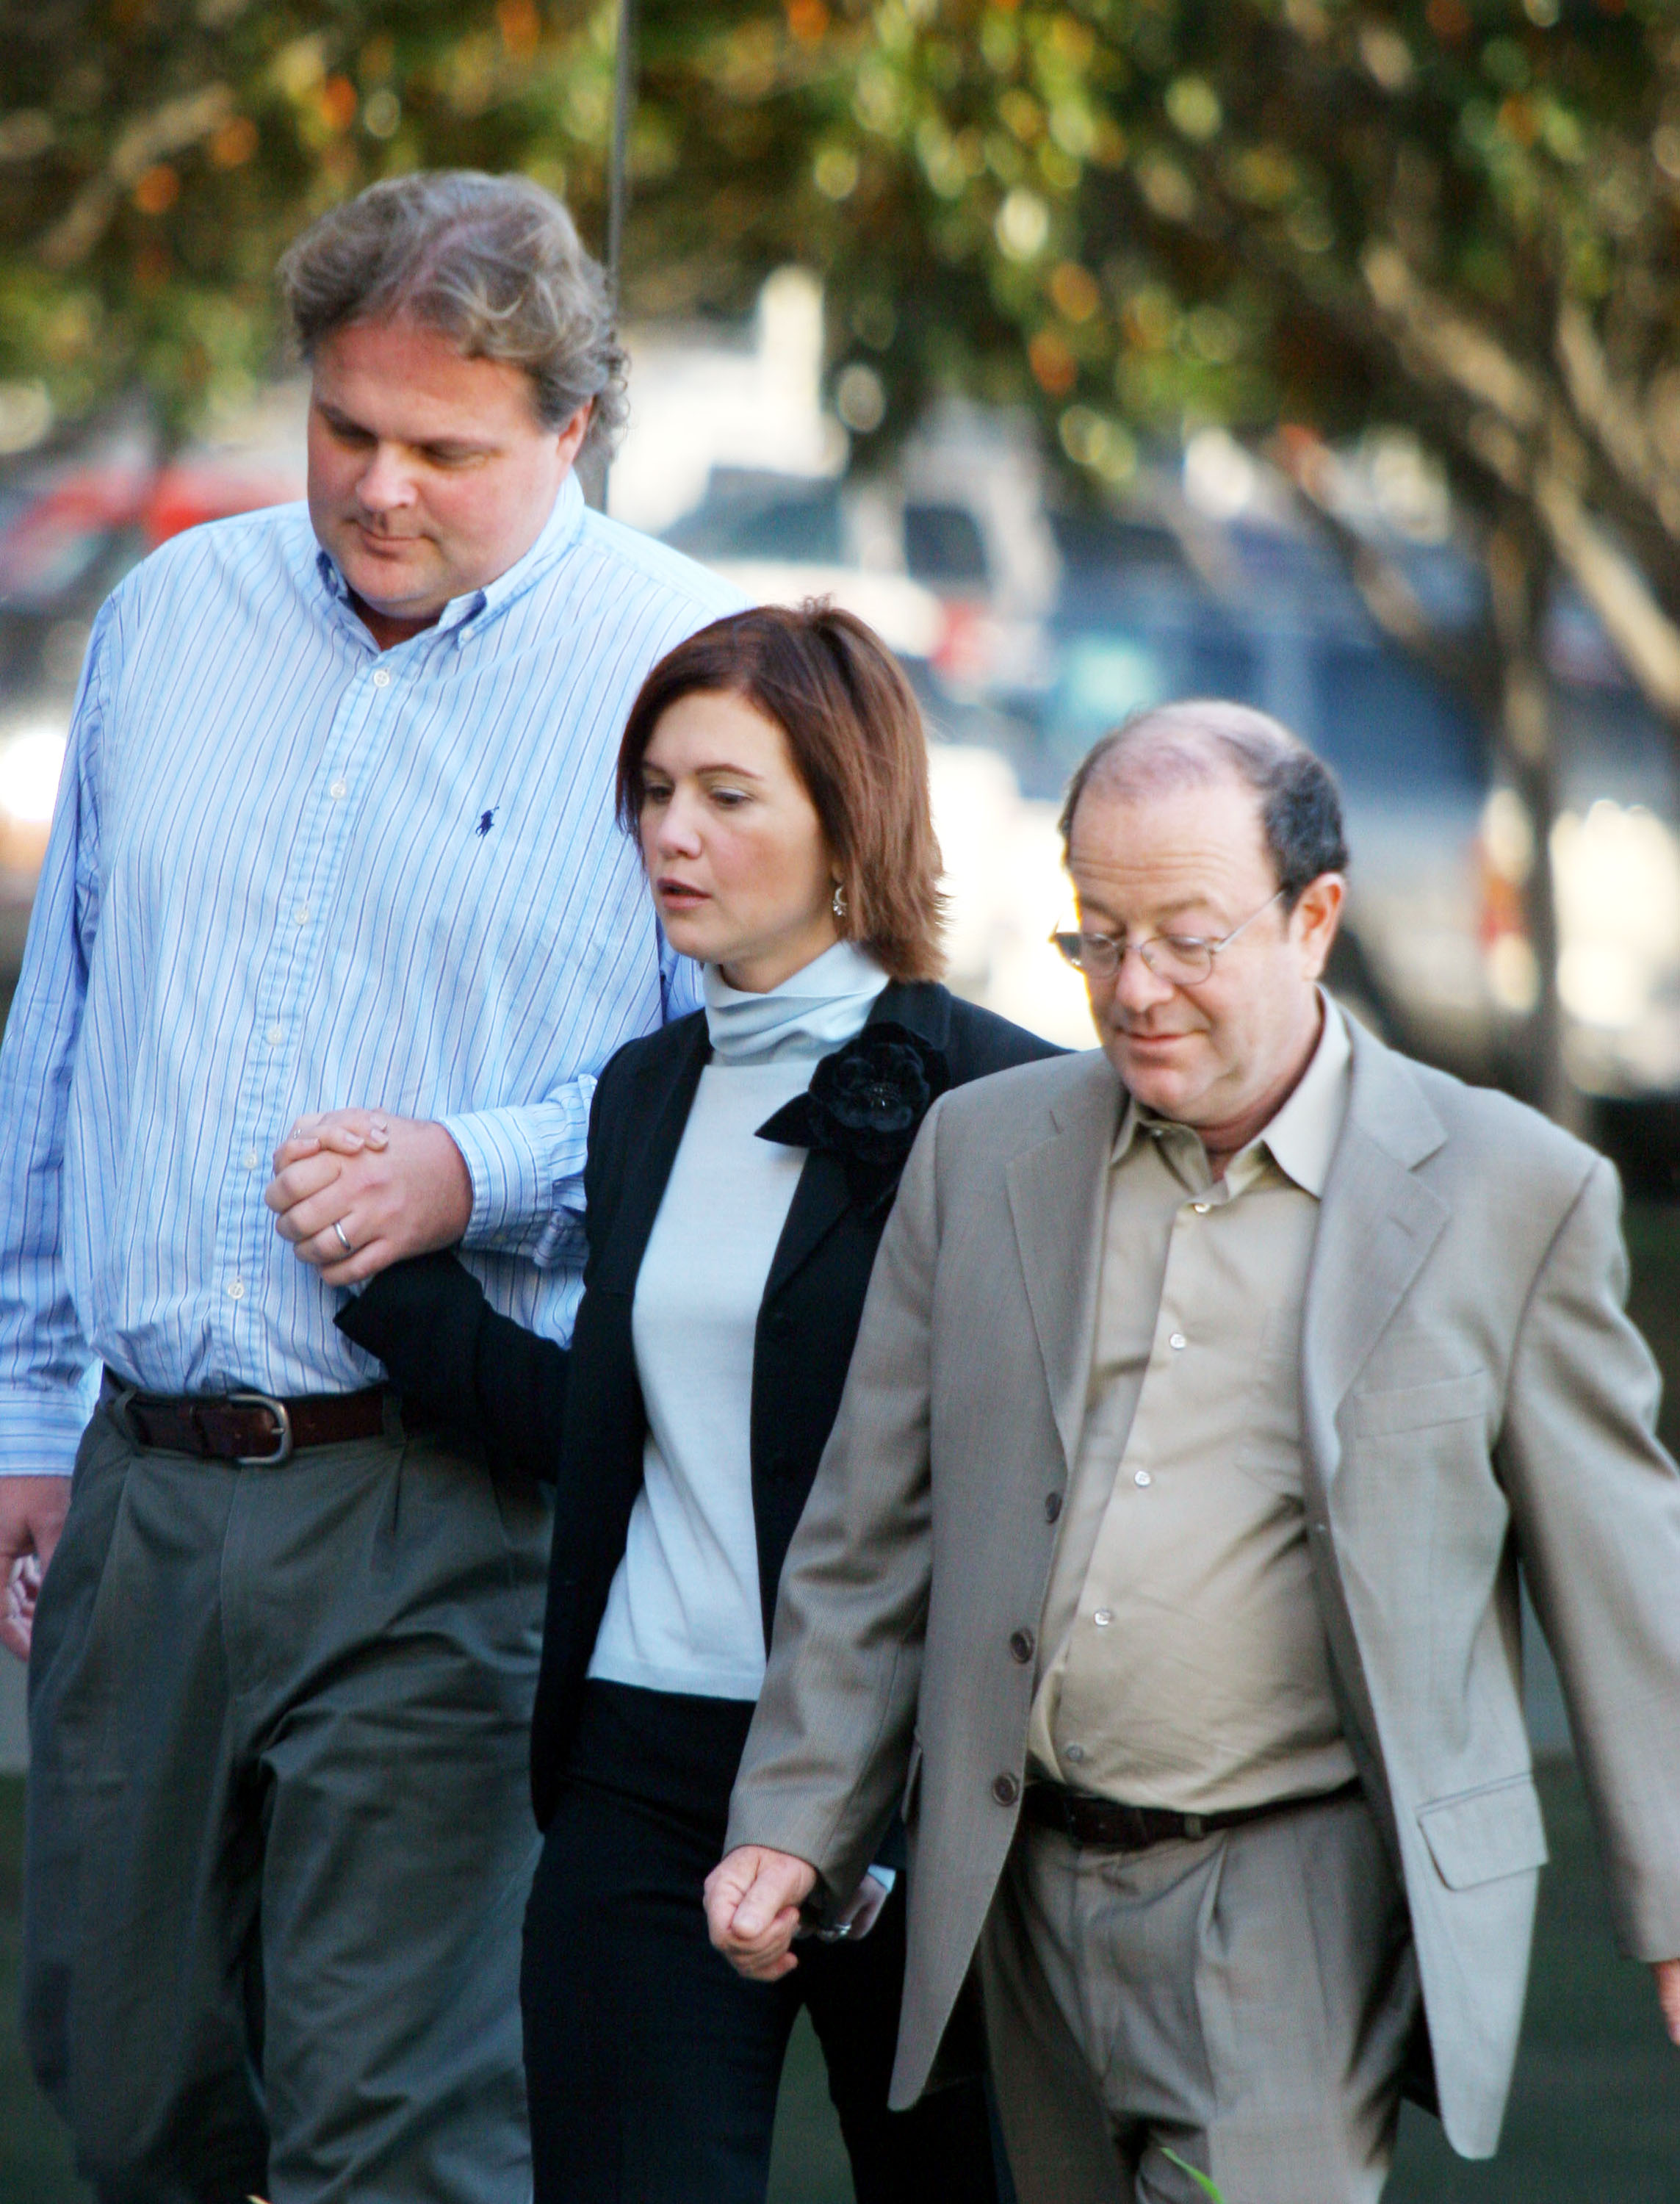 Tracey Gold and Roby Marshall arriving at the Ventura Superior Courthouse on November 19, 2004, in Ventura, California. | Source: Getty Images